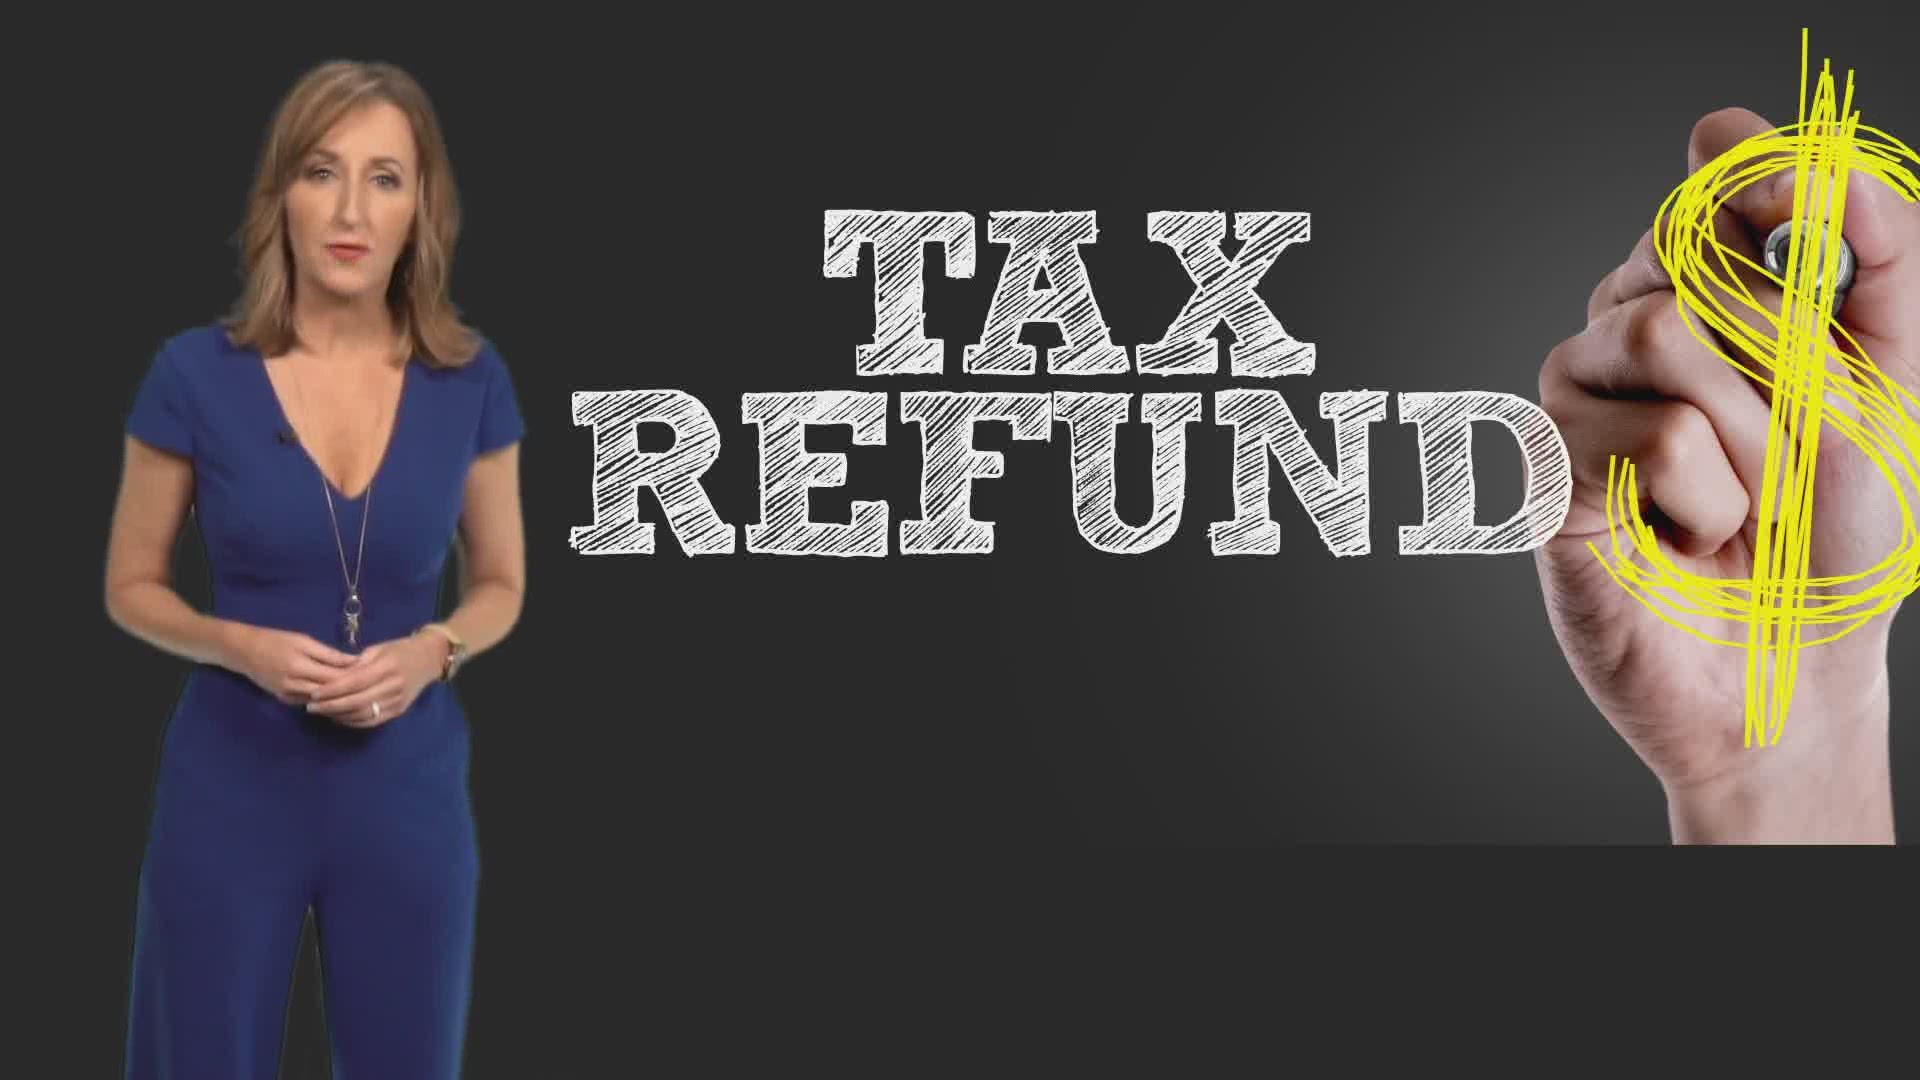 Your could be getting an extra tax refund if you already filed your 2020 taxes and you collected unemployment last year.